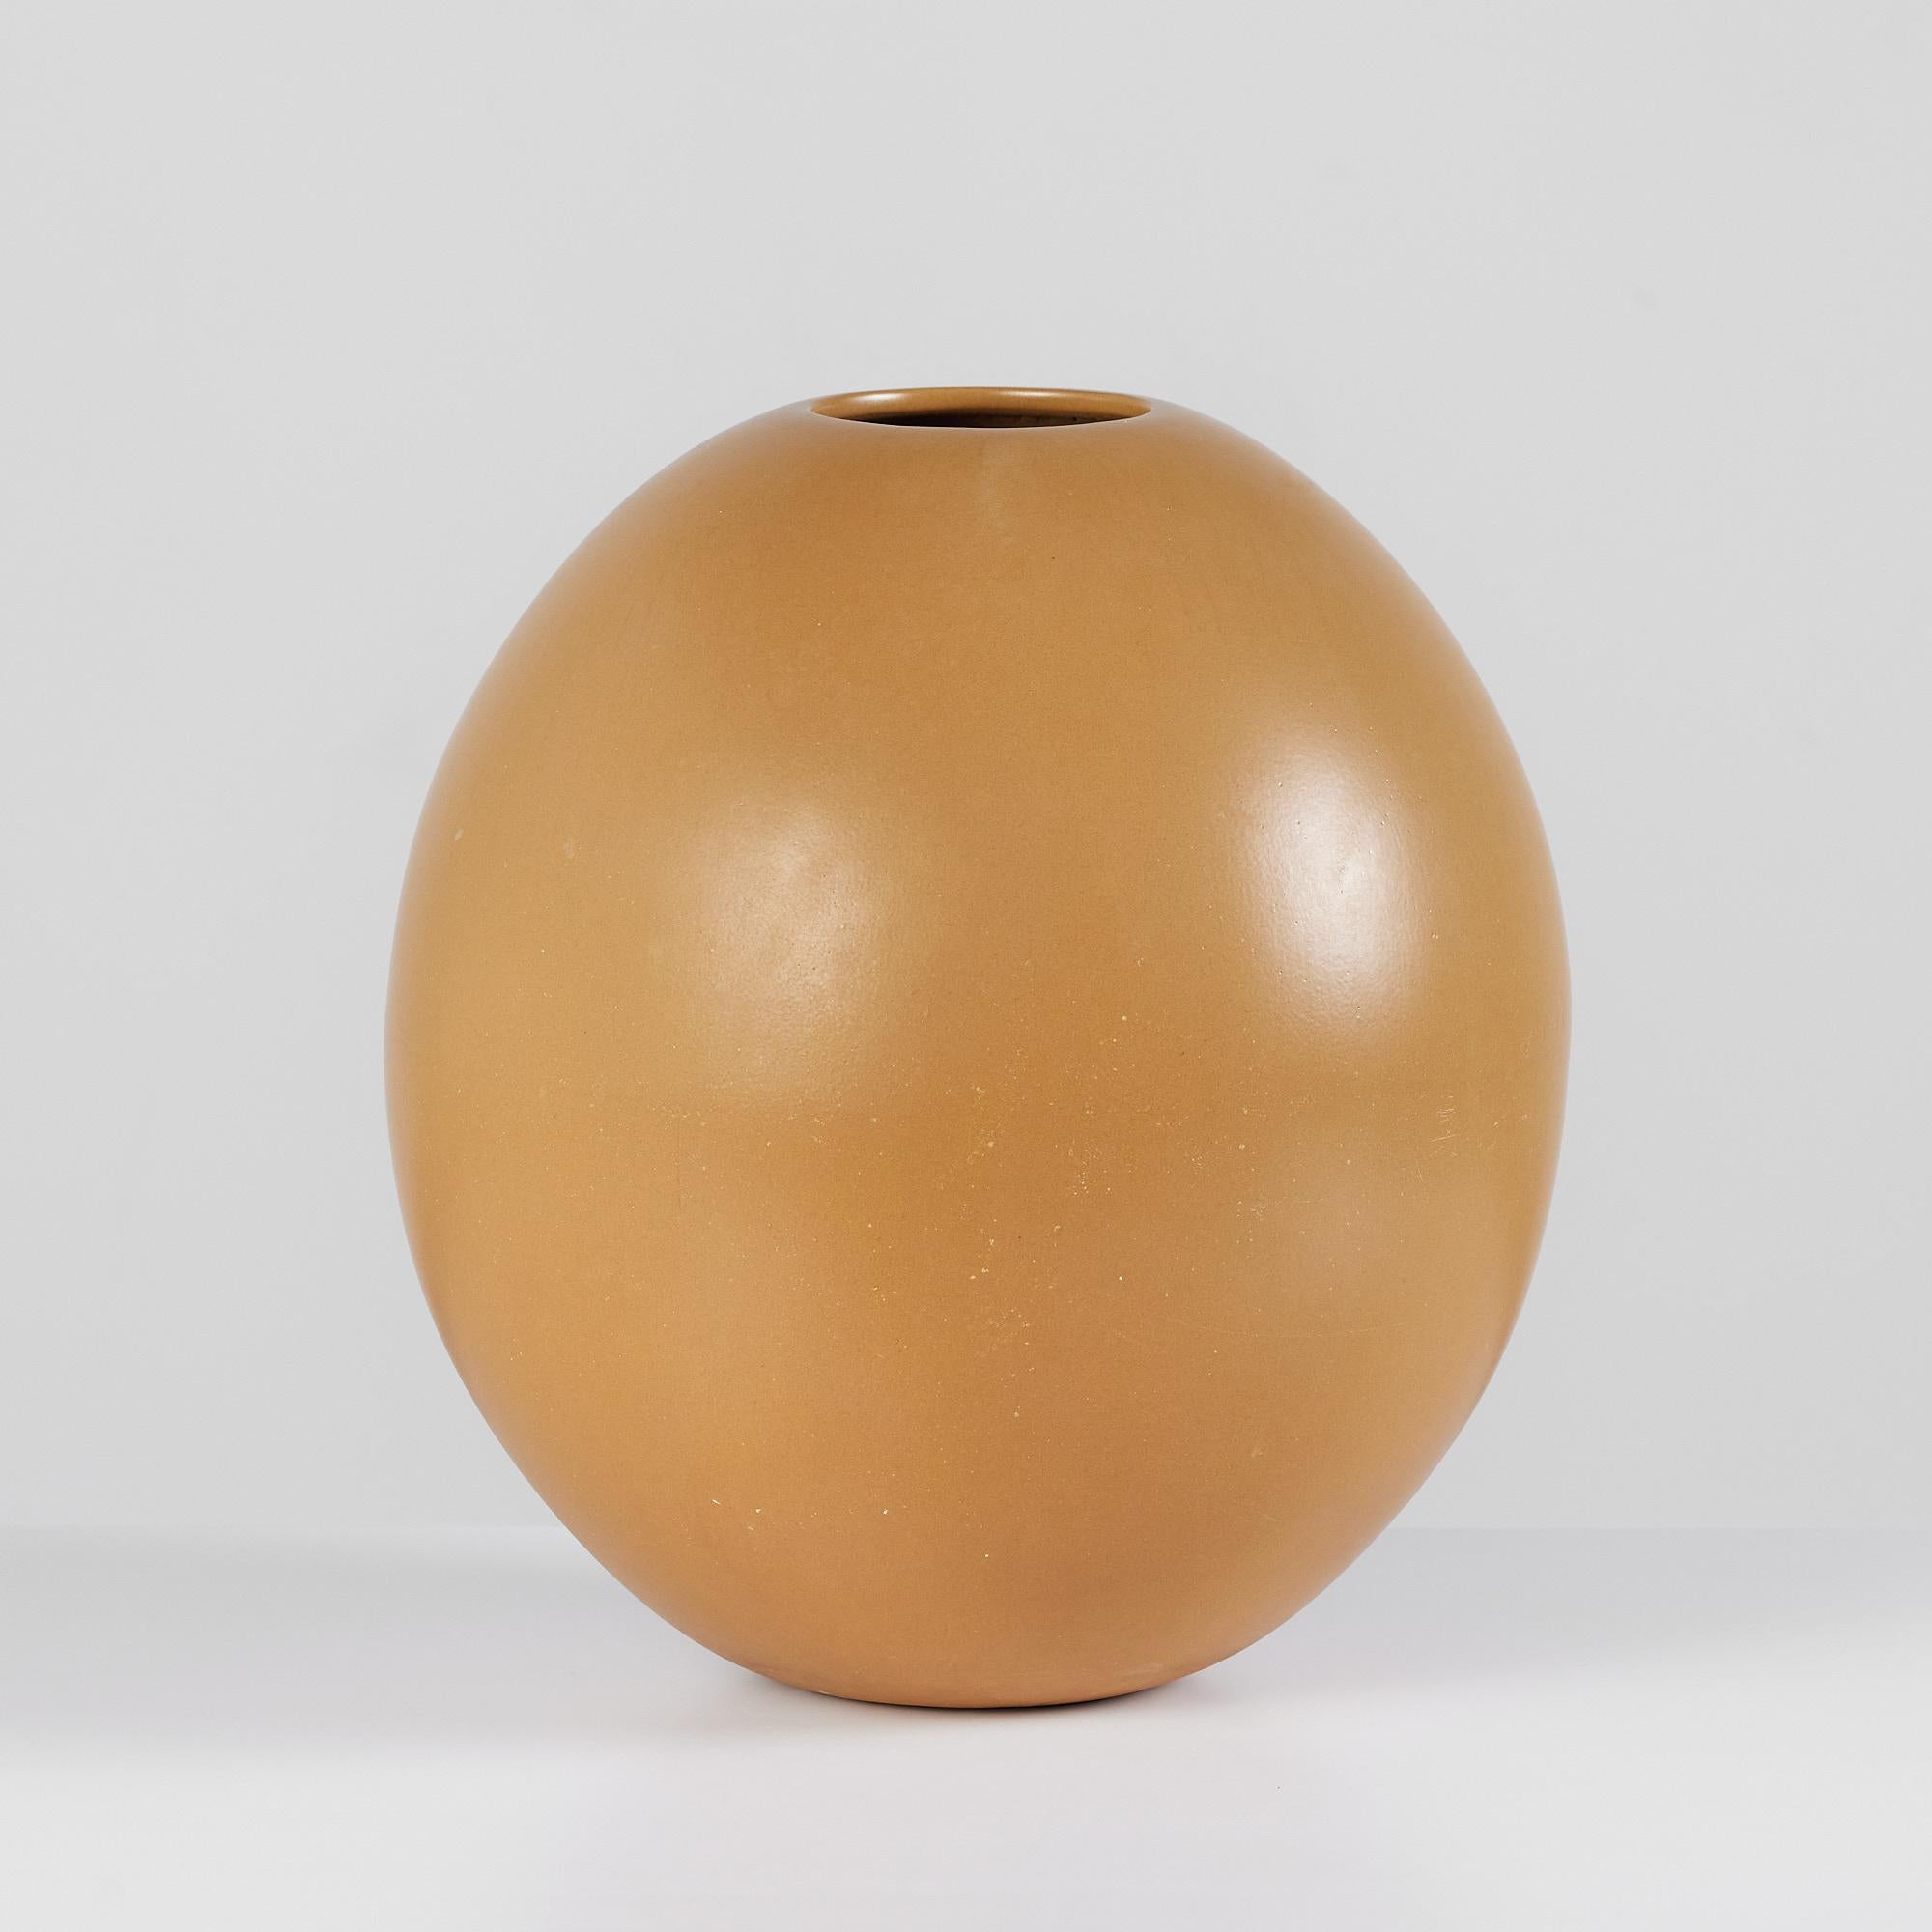 Fabulous rounded glazed planter in gold by ceramics artist Marilyn Kay Austin for Architectural Pottery. This example, called the floor vase, has an almost spherical design with a small 4